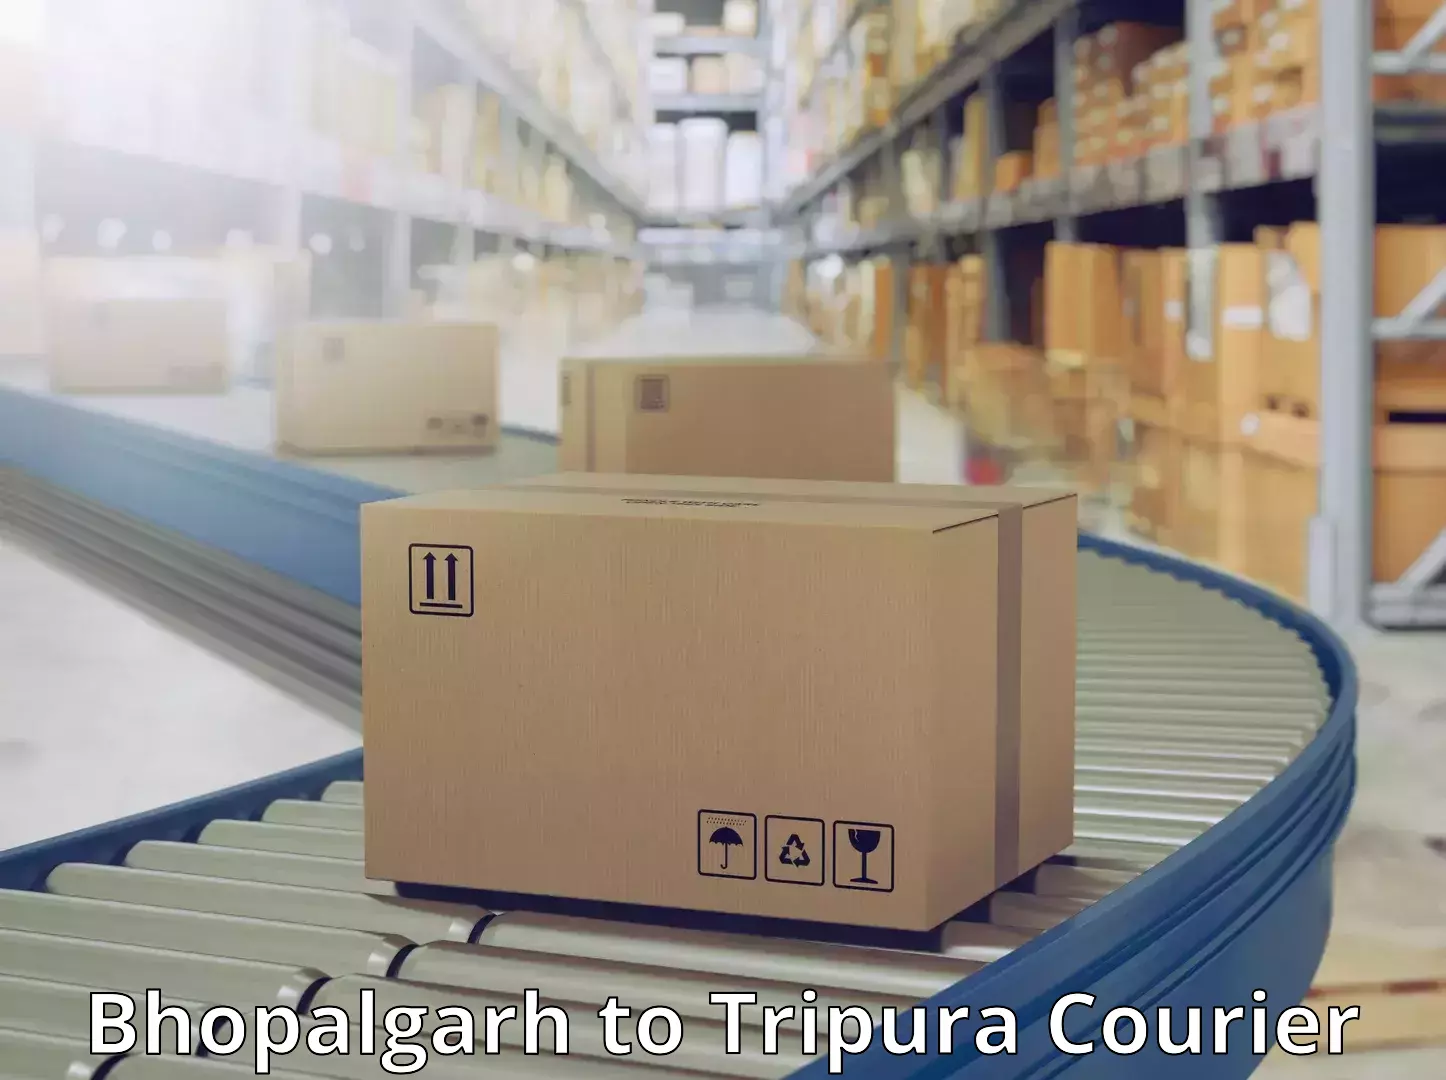 Sustainable shipping practices Bhopalgarh to Udaipur Tripura